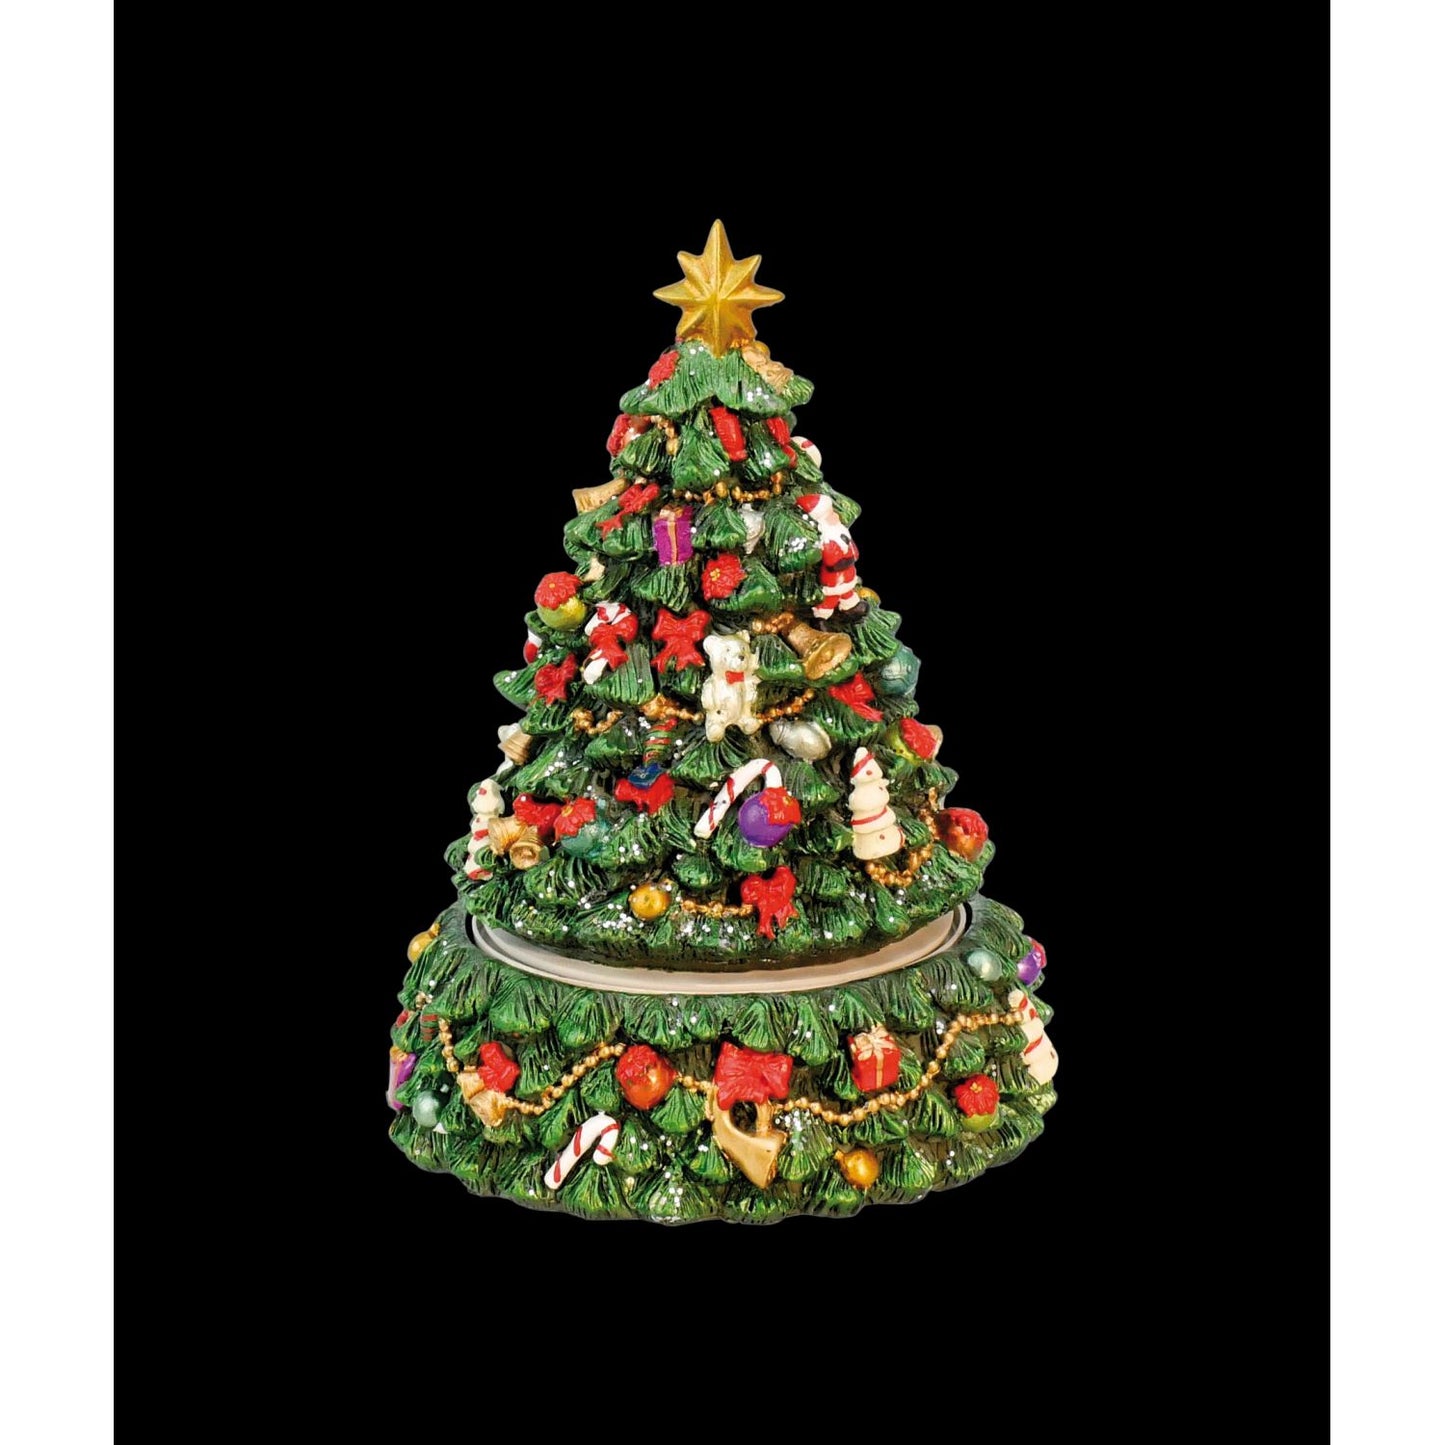 Musicbox Kingdom 6" Christmas Tree Turns To The Melody “Oh Christmas-Tree”